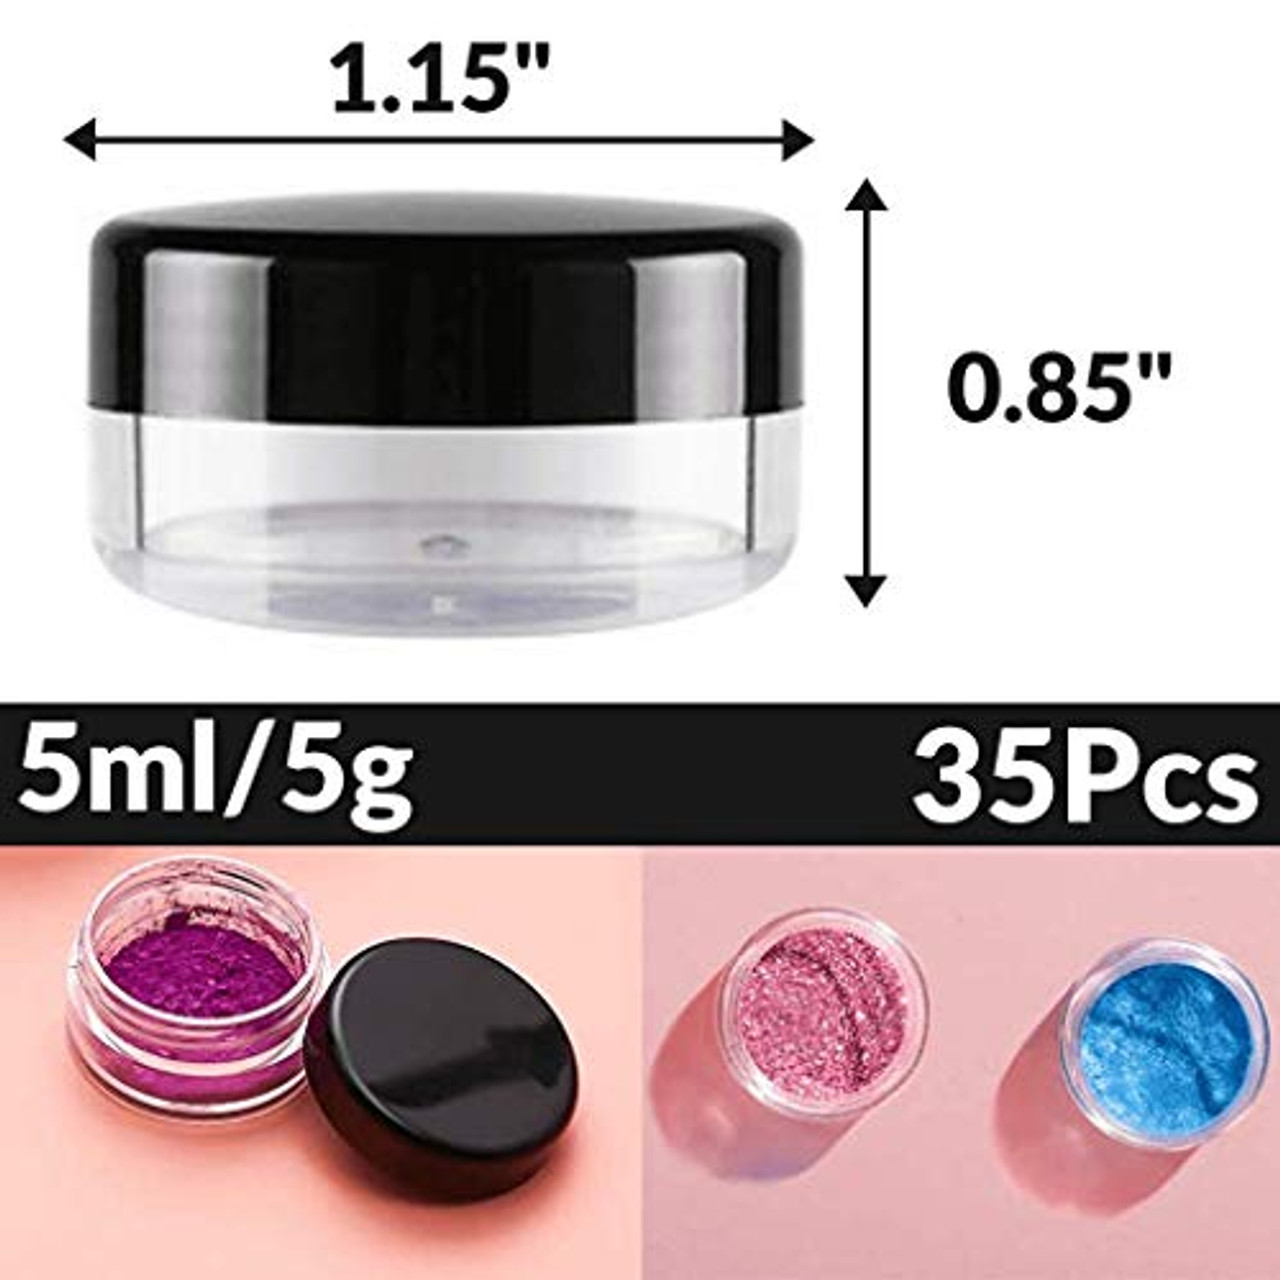 5ml/5g Small Containers With Lids - 35Pcs Plastic Jars With Lids (Blue) - Small  Plastic Containers With Lids for Cosmetics Lip Balm Candles Tea Pills Herbs  Mints Spice Salve Powders & DIY